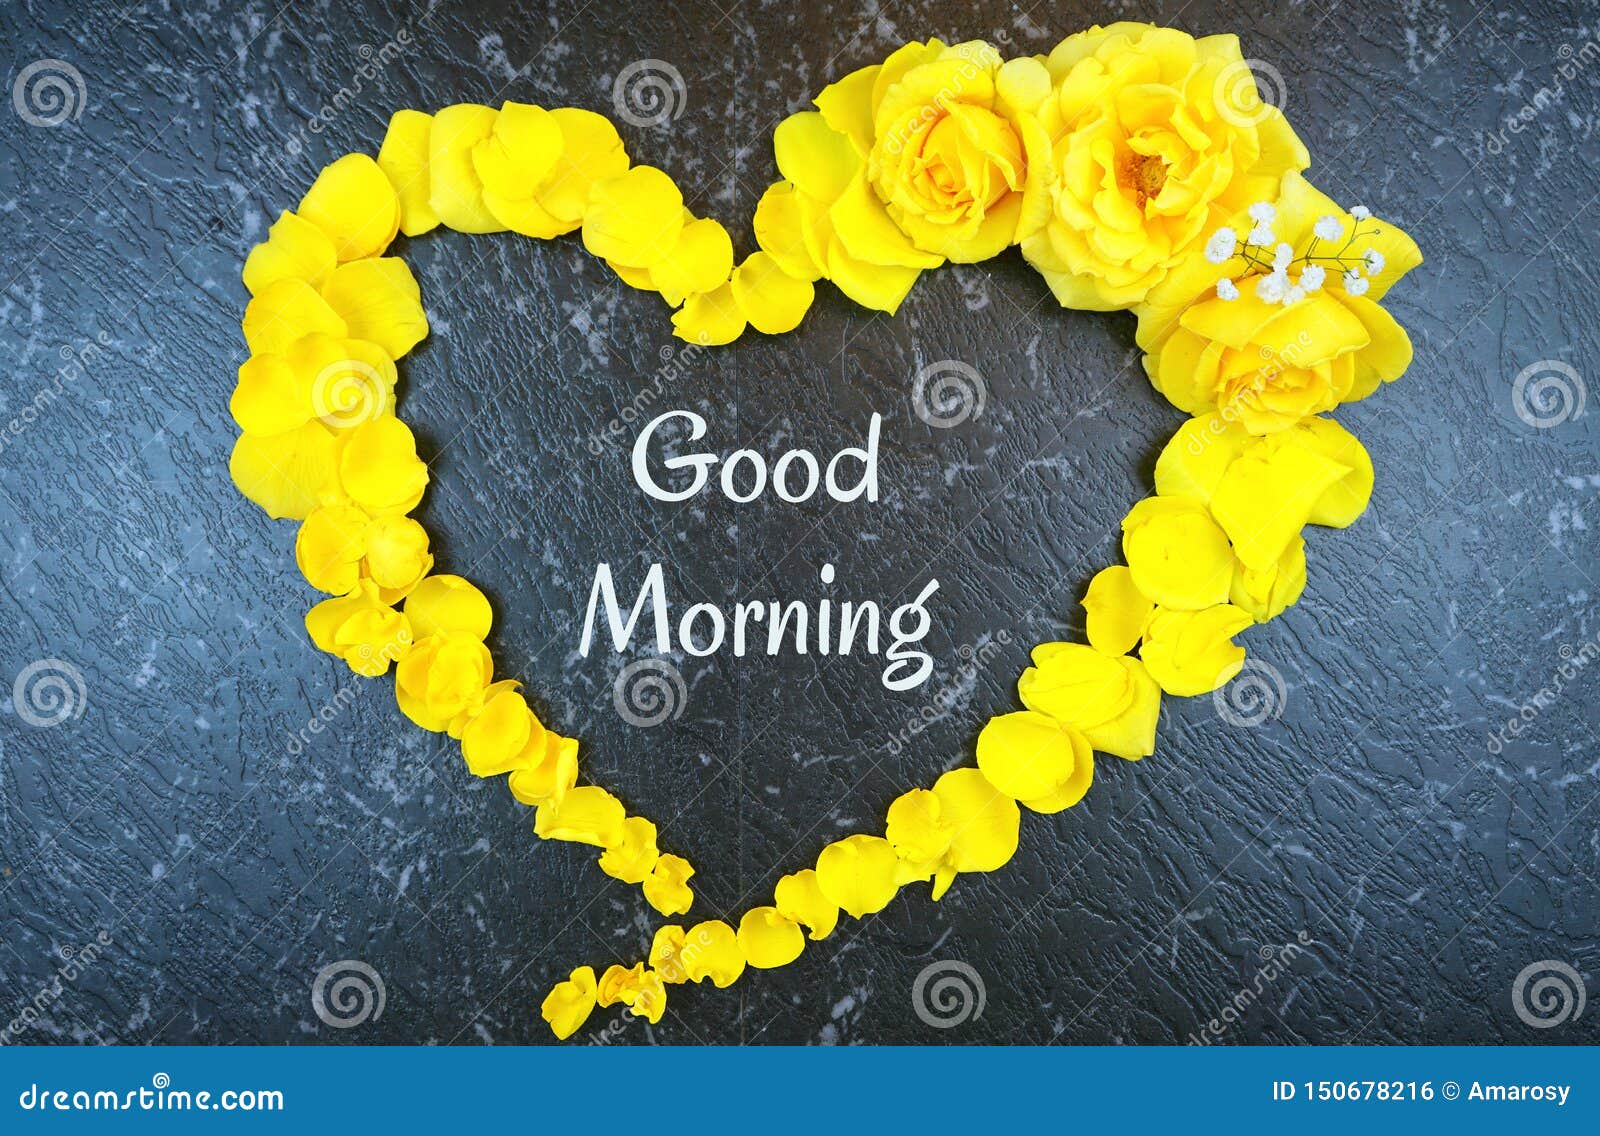 Good Morning Concept with Text Inside Heart Made from Fresh Yellow ...